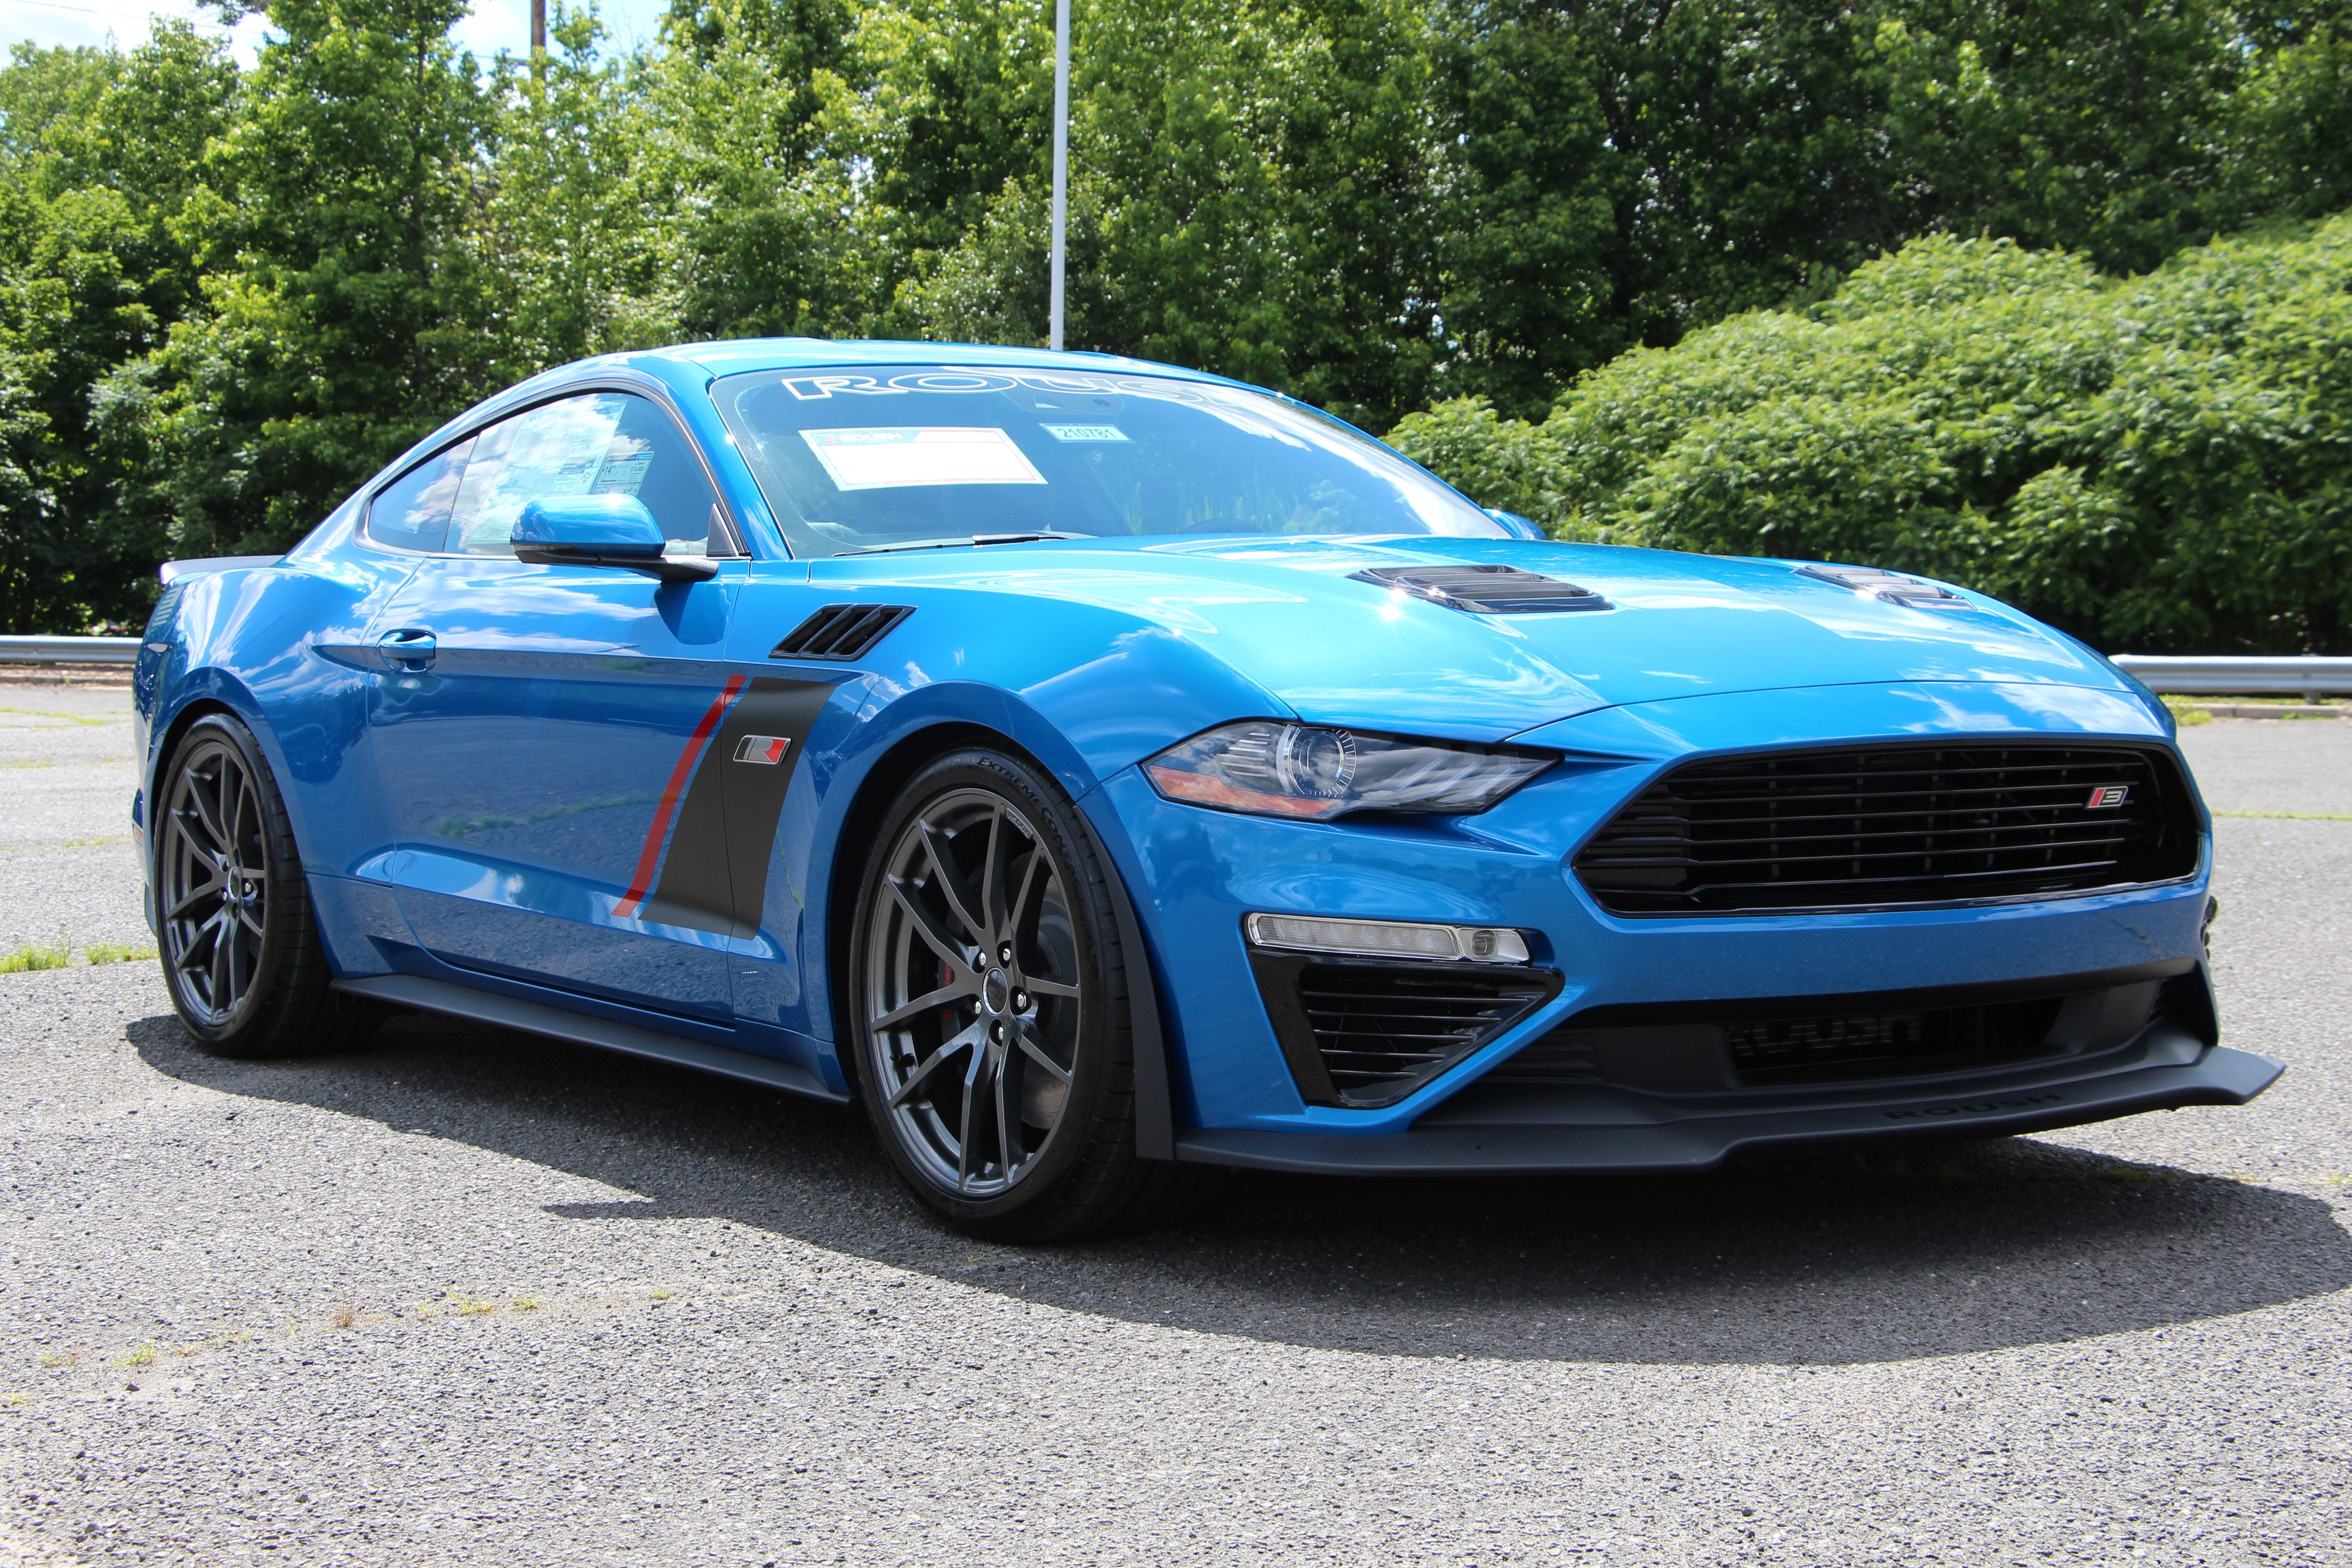 ROUSH Mustang Blue at All American Ford of Hackensack in Hackensack NJ